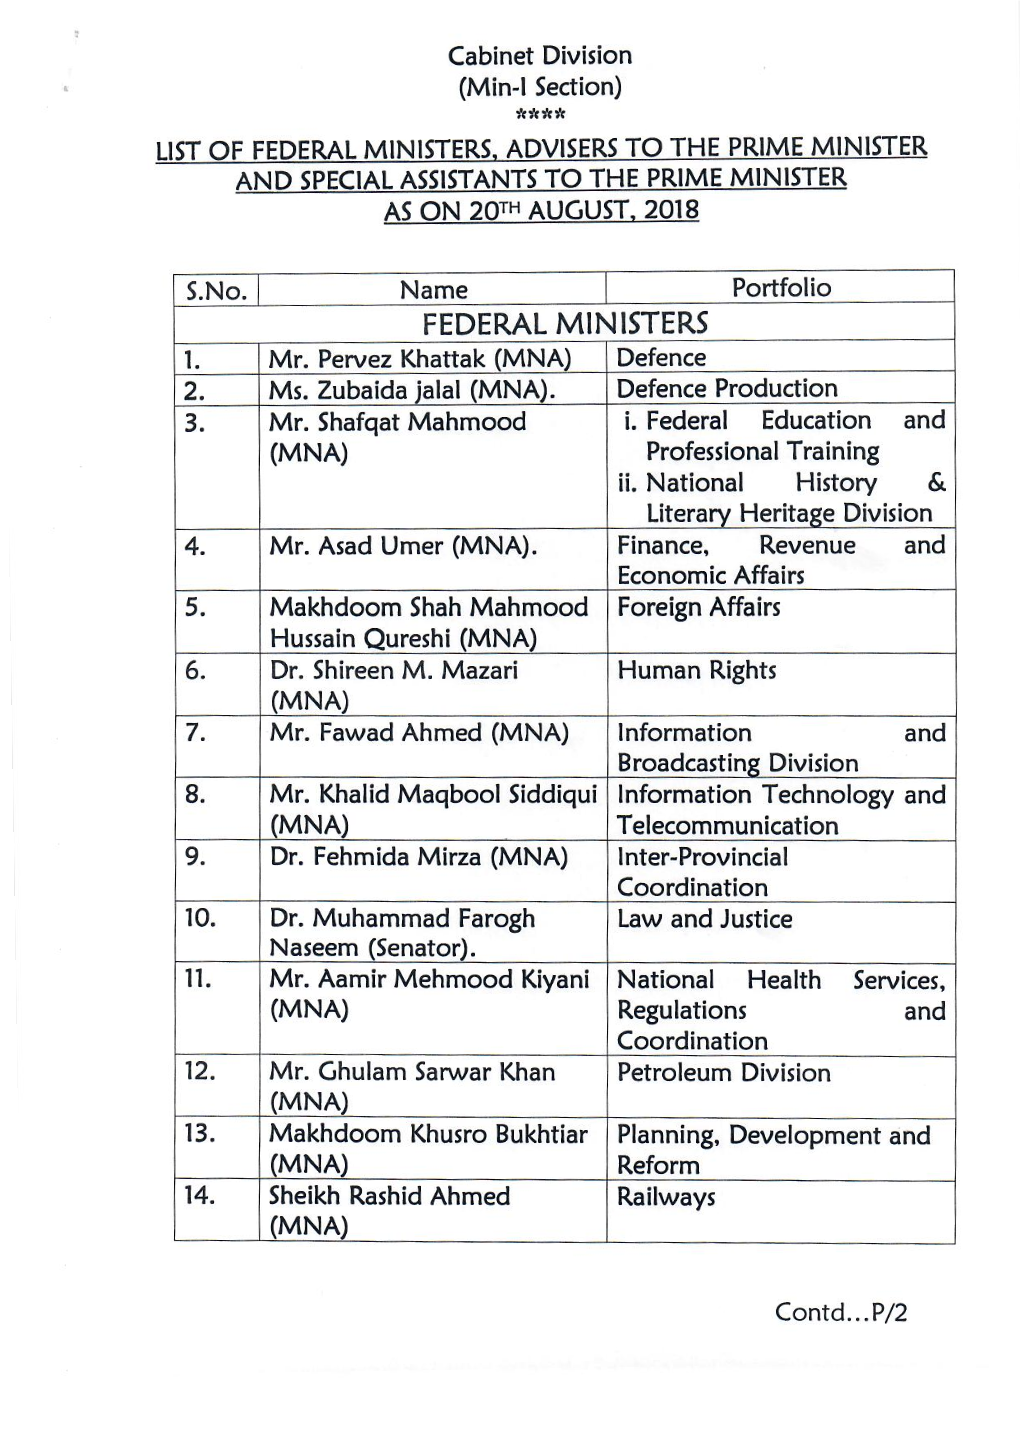 Federal Ministers, Advisers to the Prime Minister and Special Assistants to the Prime Minister As on 2Qth August, 2018